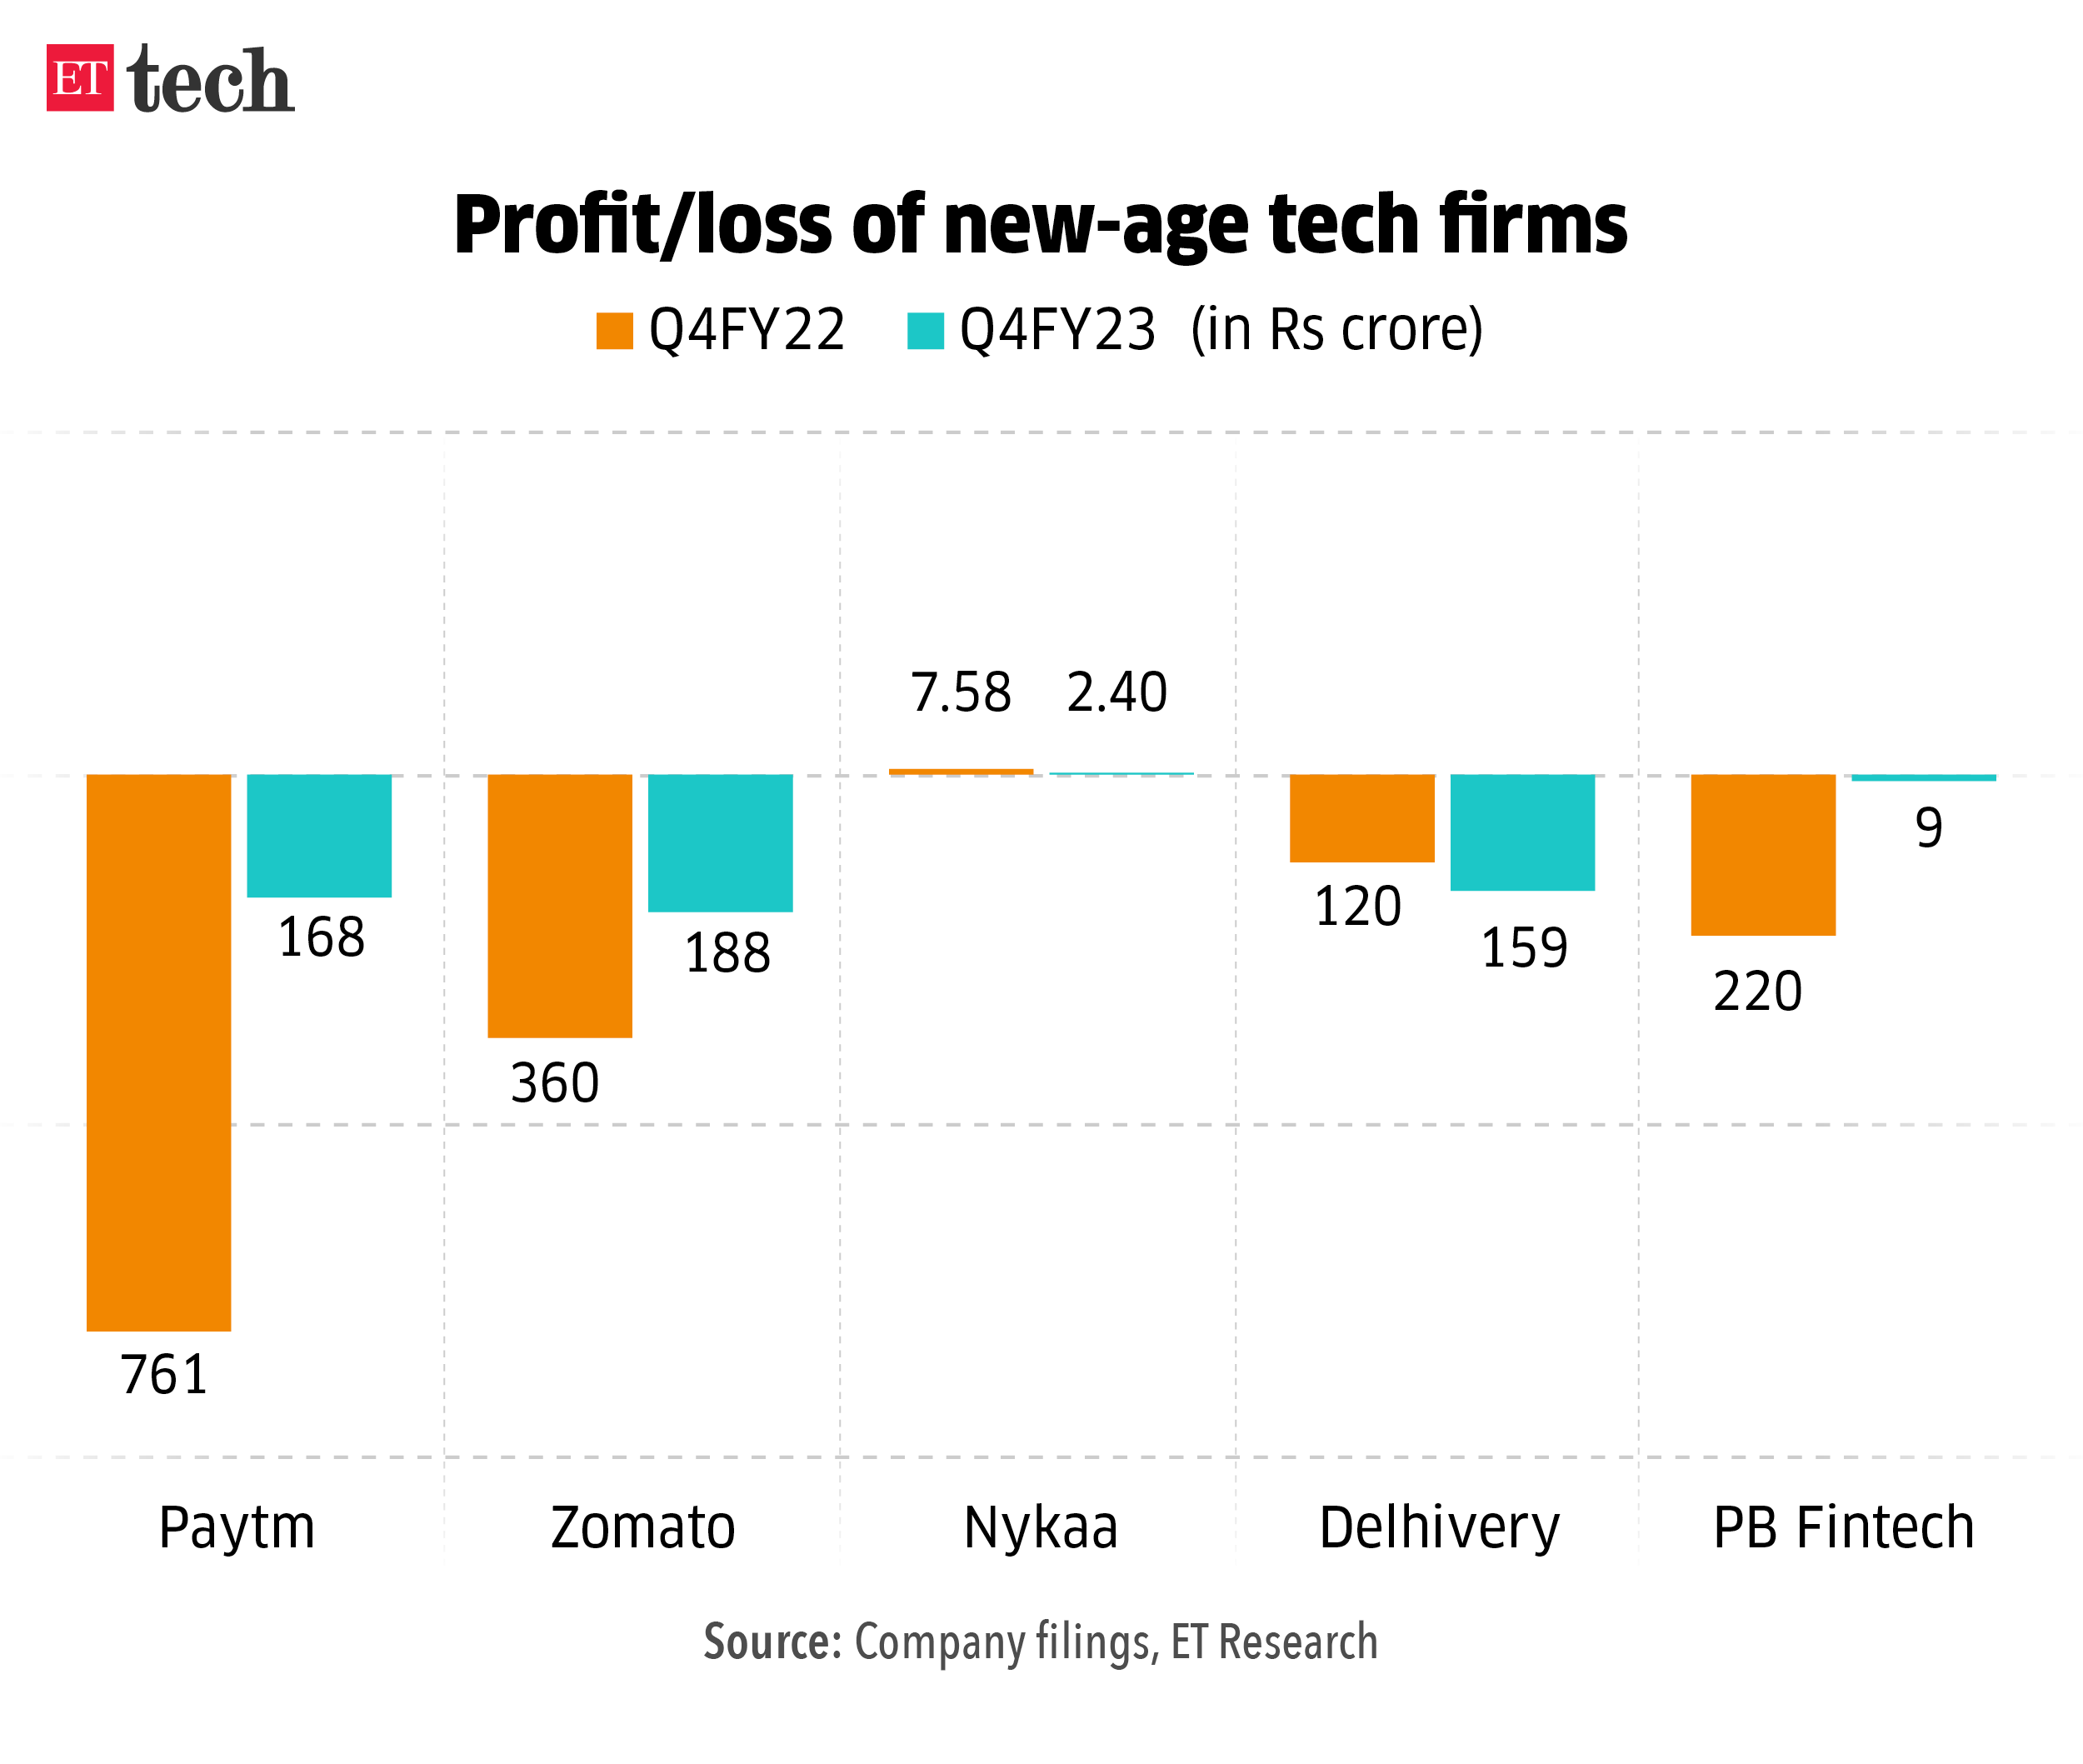 Profit loss of new-age tech firms